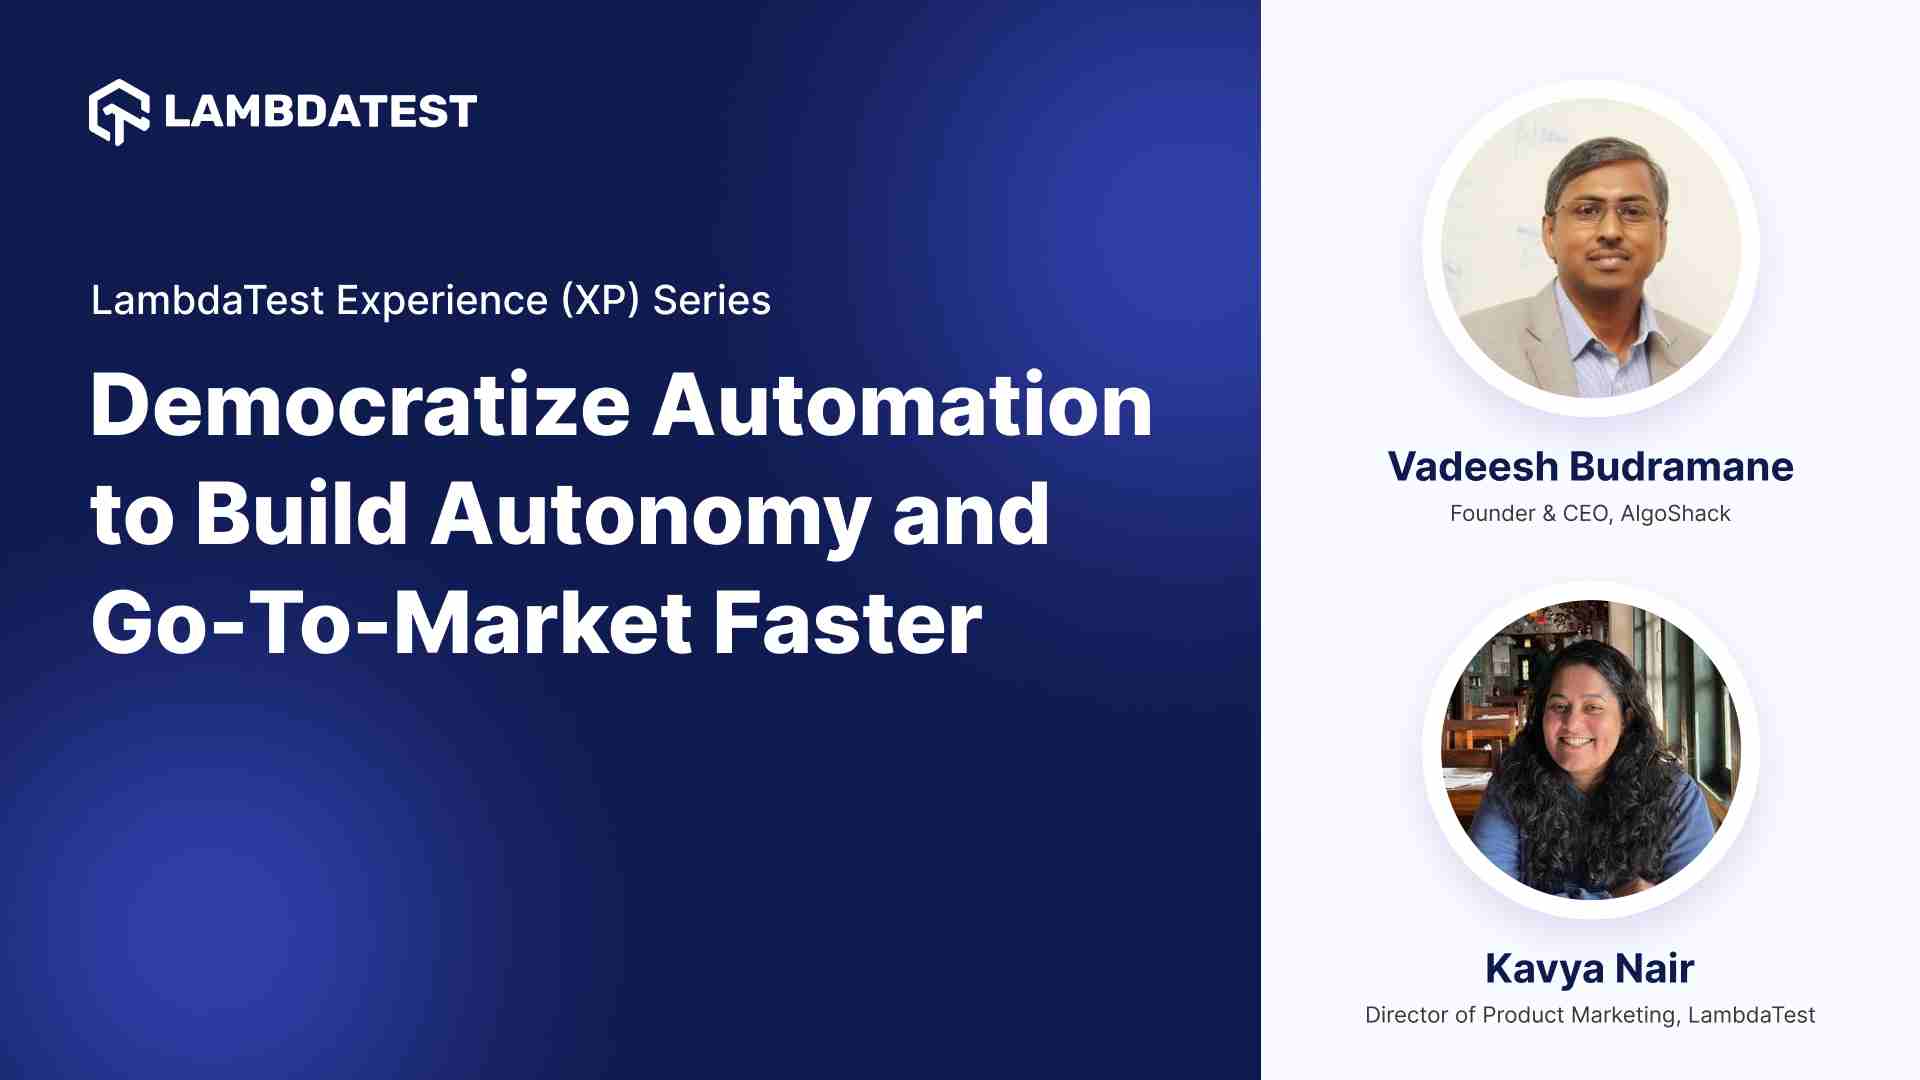 democratize-automation-to-build-autonomy-and-go-to-market-faster